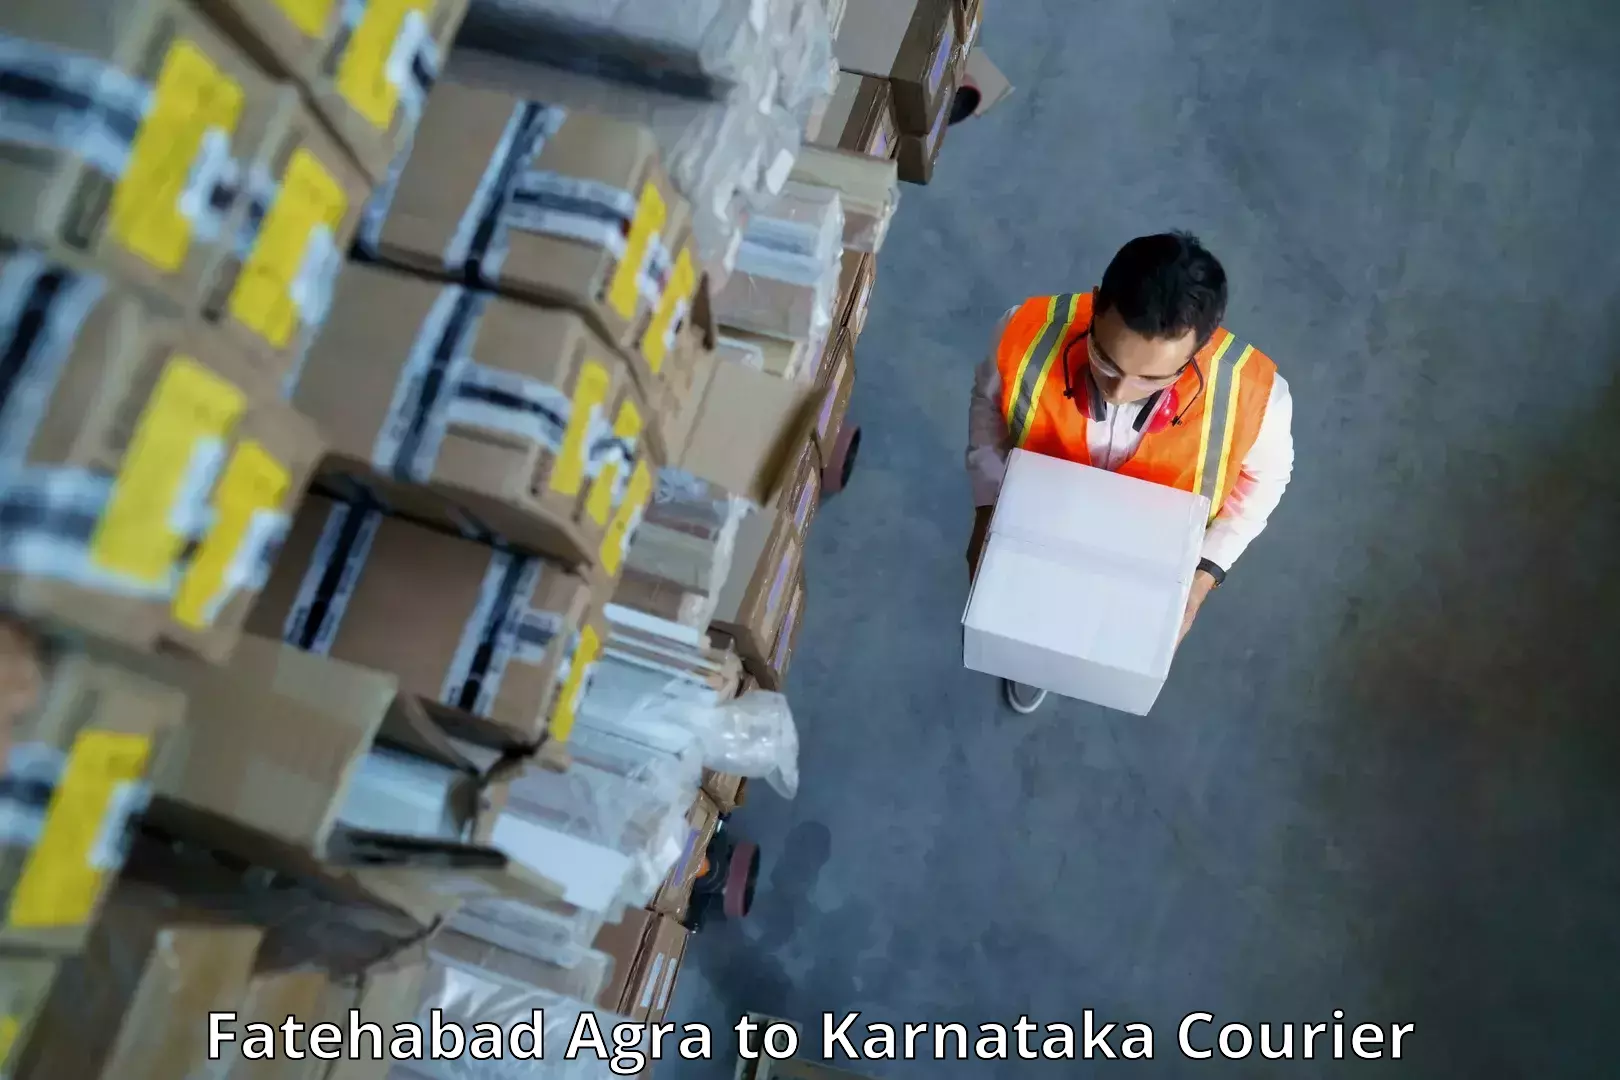 Reliable parcel services Fatehabad Agra to Shanivarasanthe